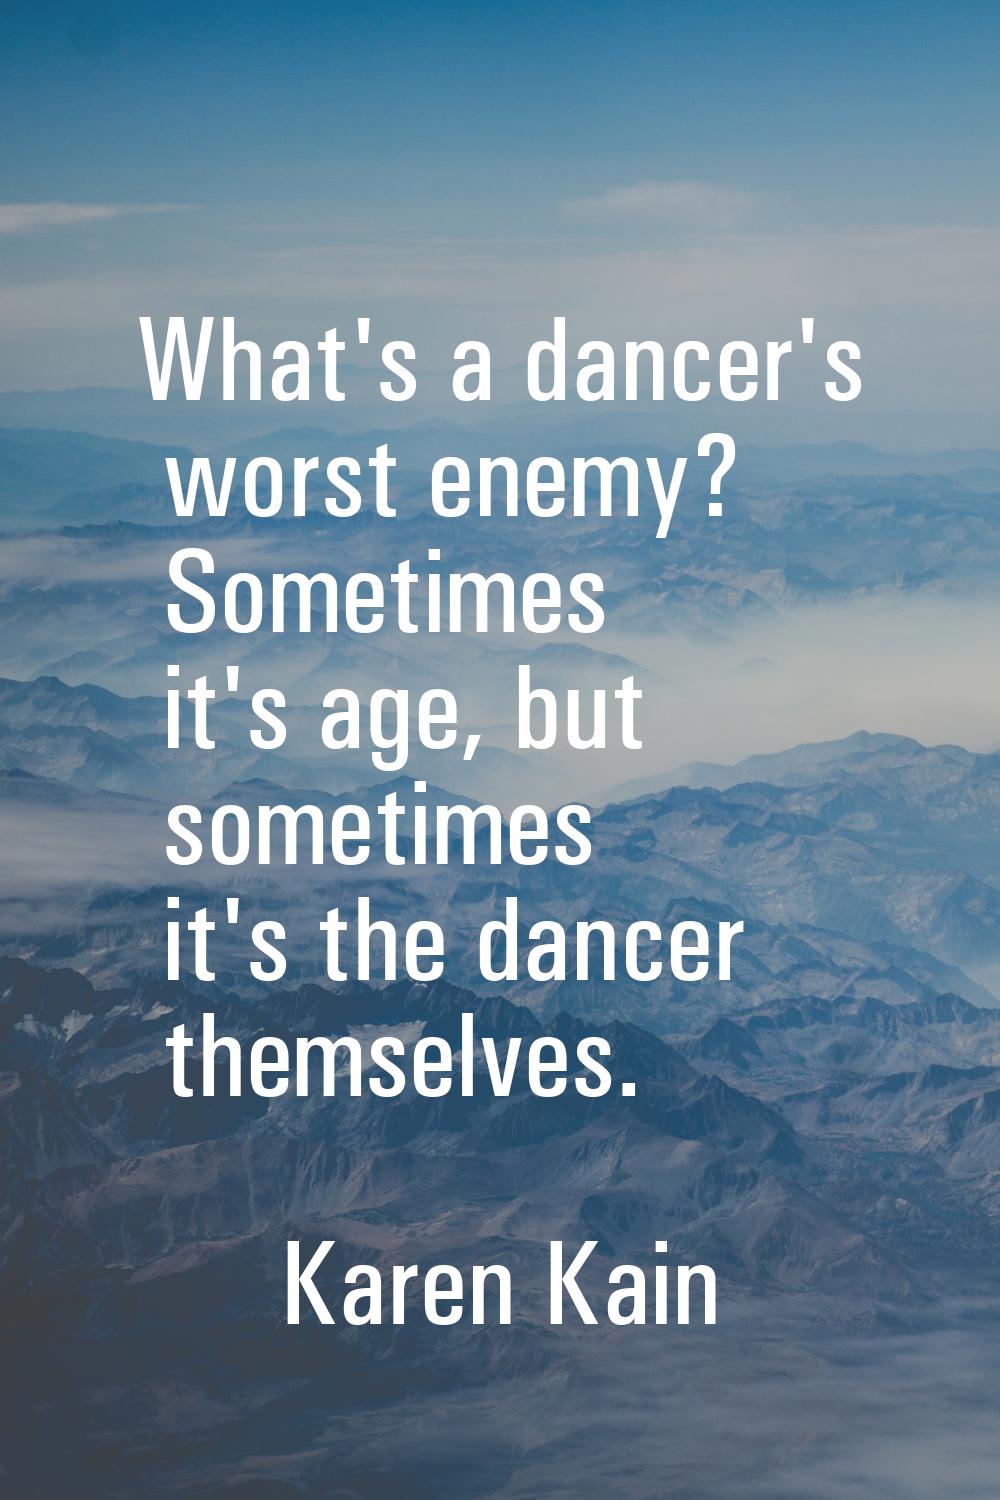 What's a dancer's worst enemy? Sometimes it's age, but sometimes it's the dancer themselves.